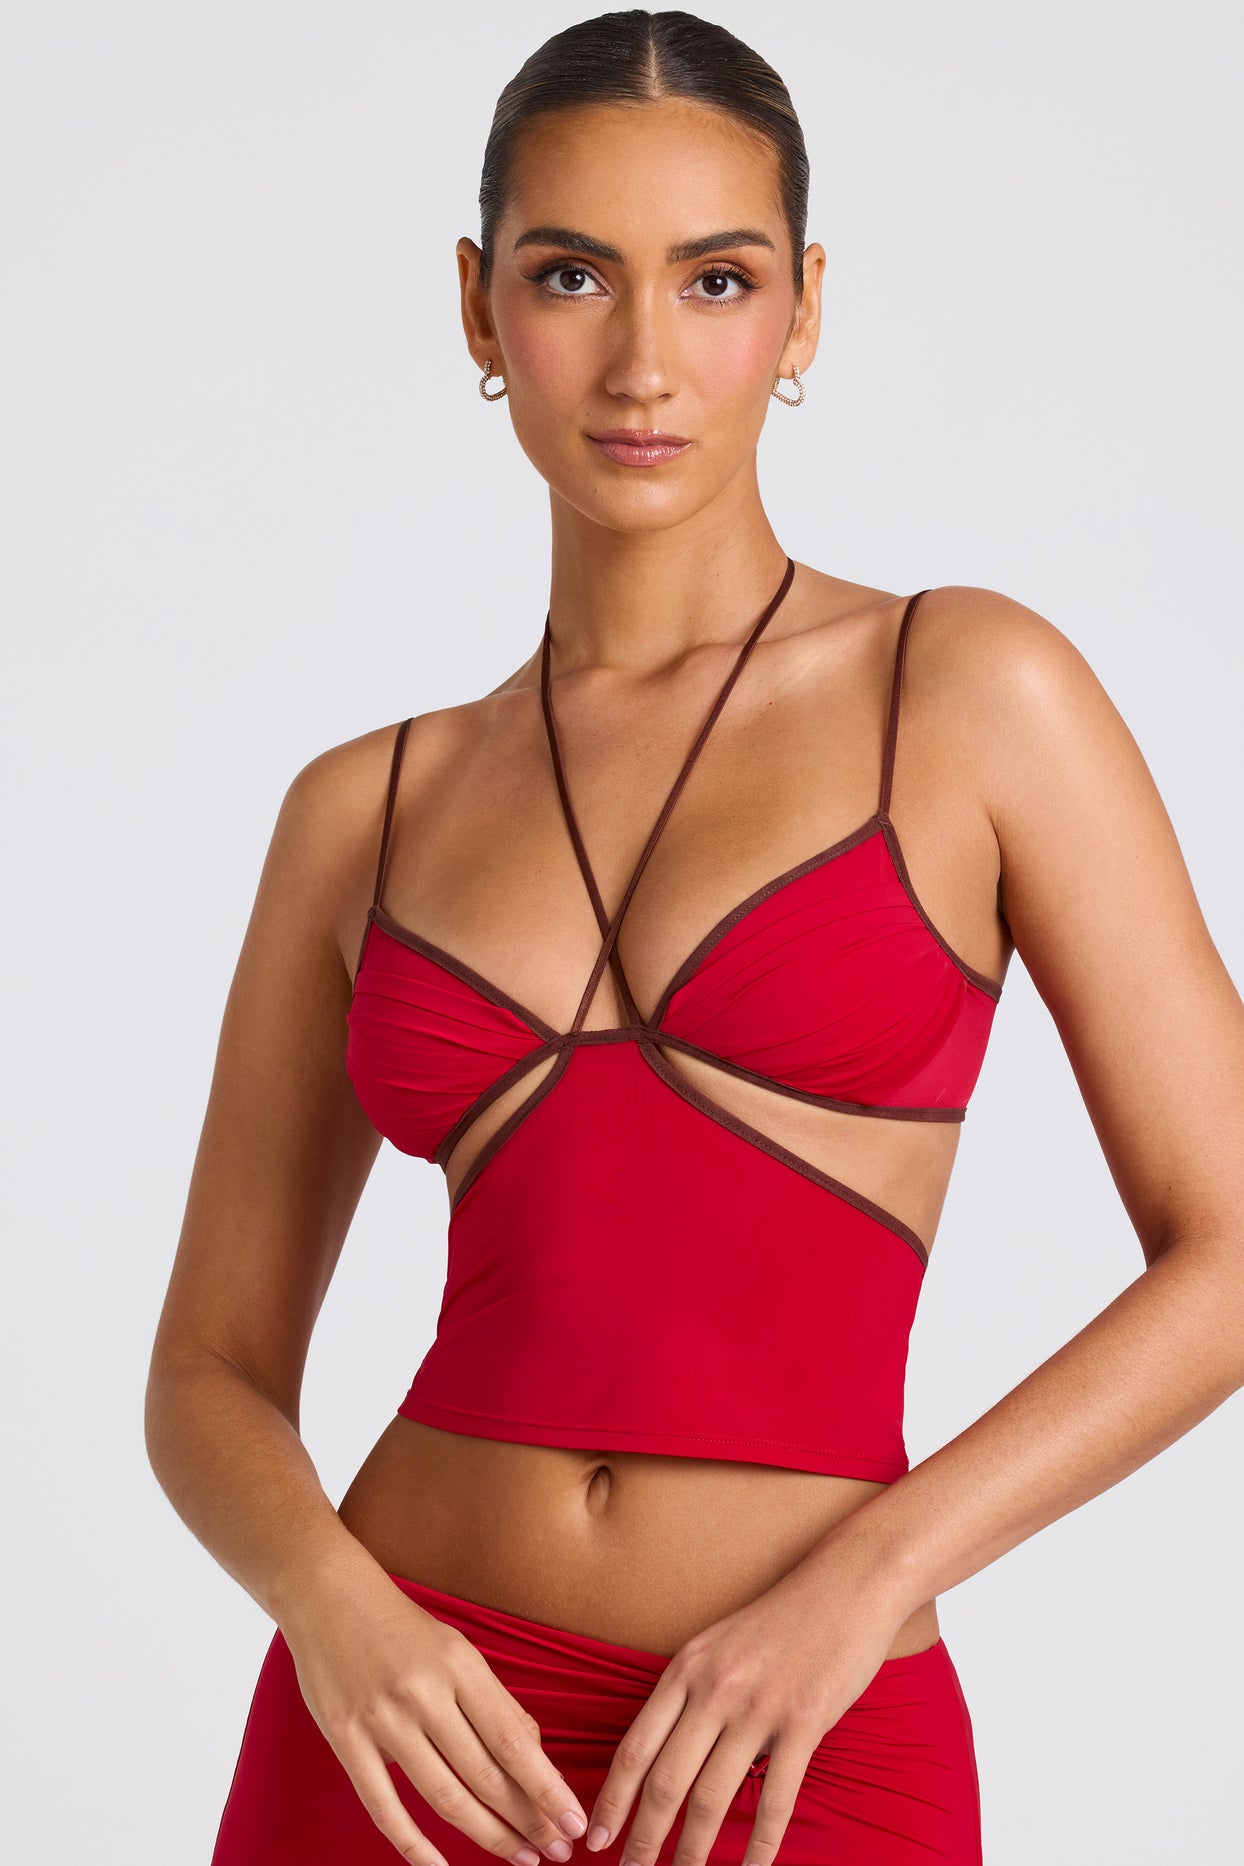 Contrast Binding Cami Top in Fire Red